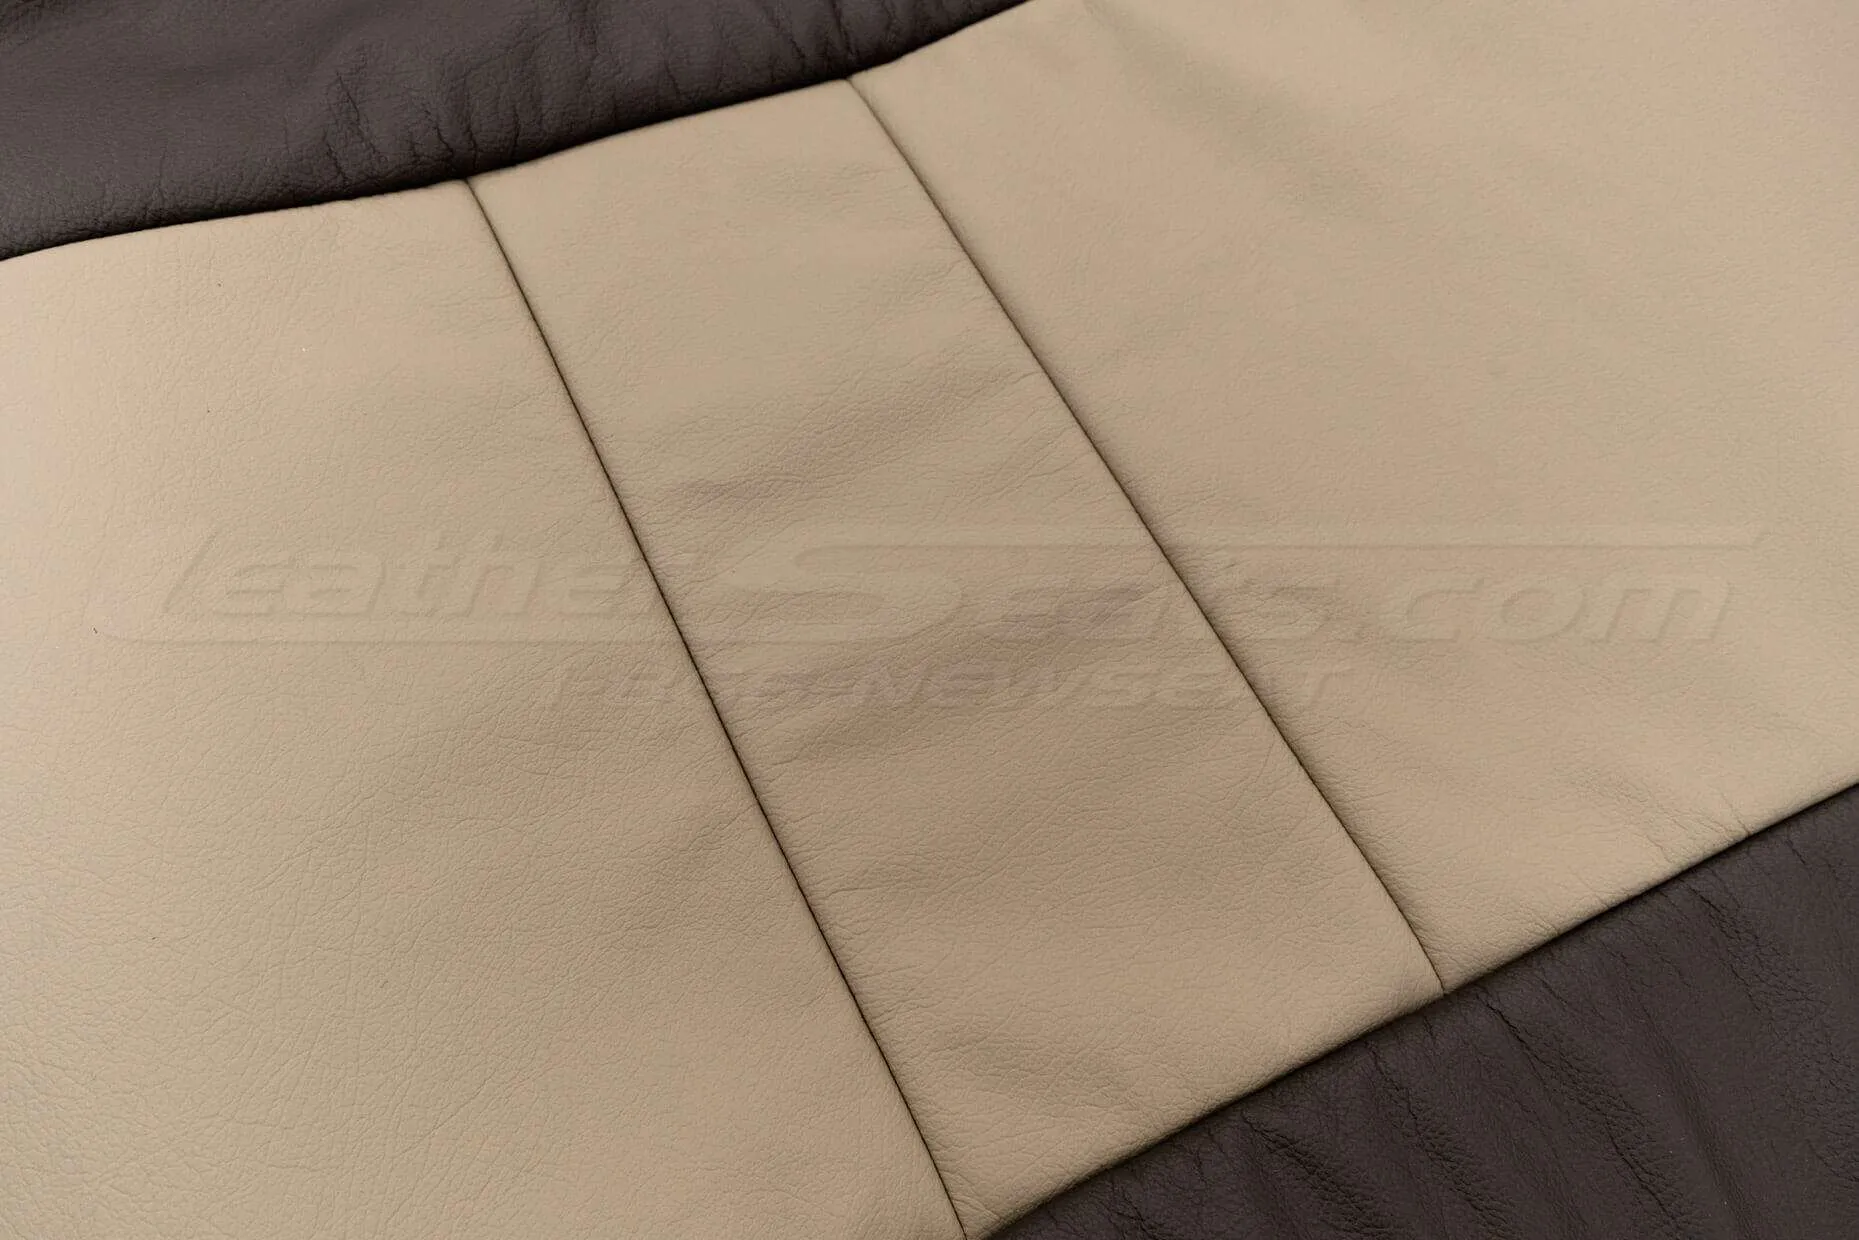 Ivory leather texture